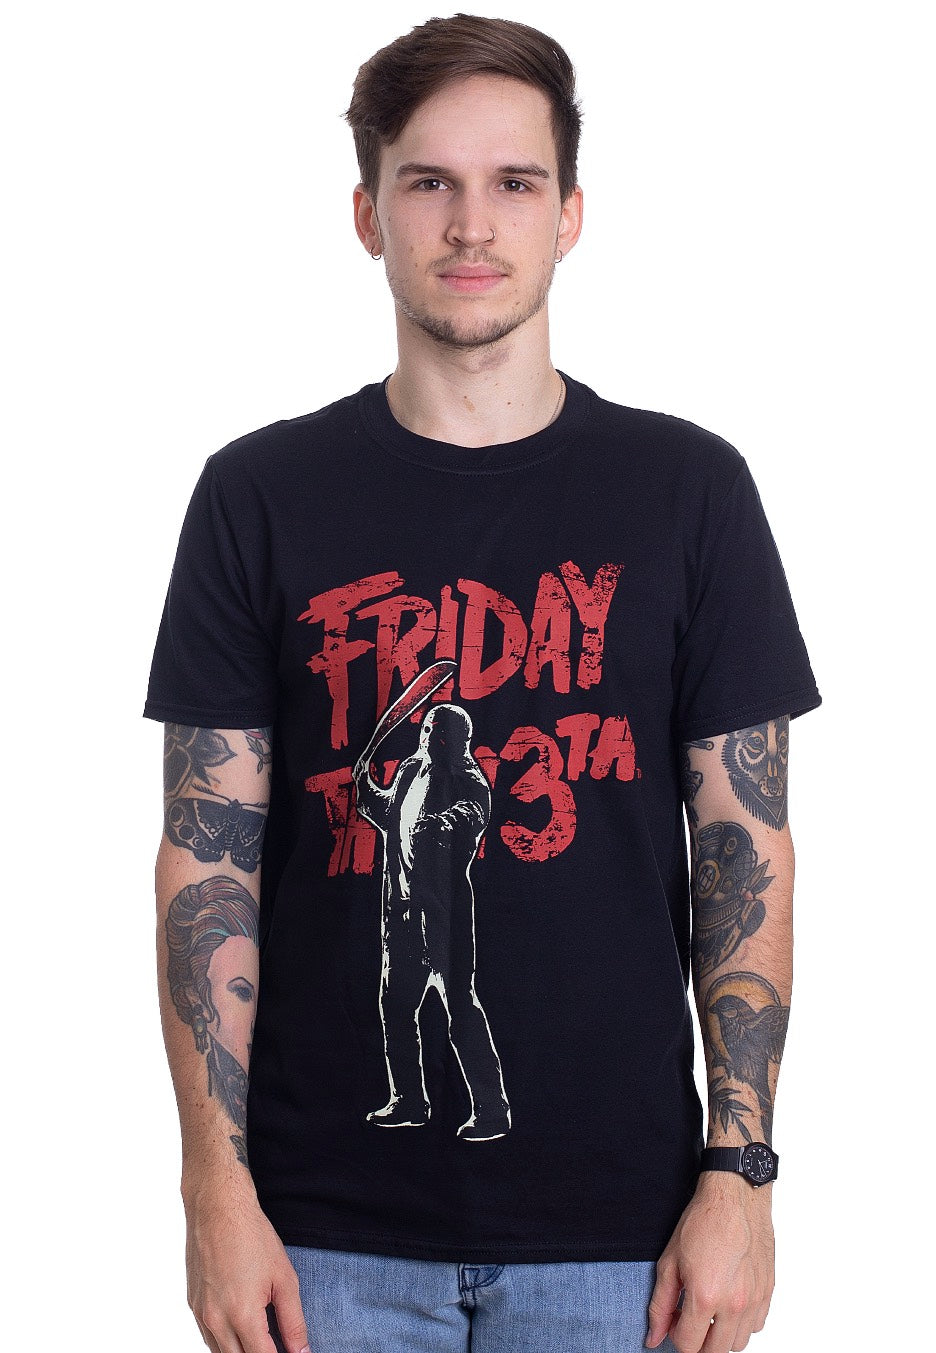 Friday The 13th - Jason Voorhees - T-Shirt